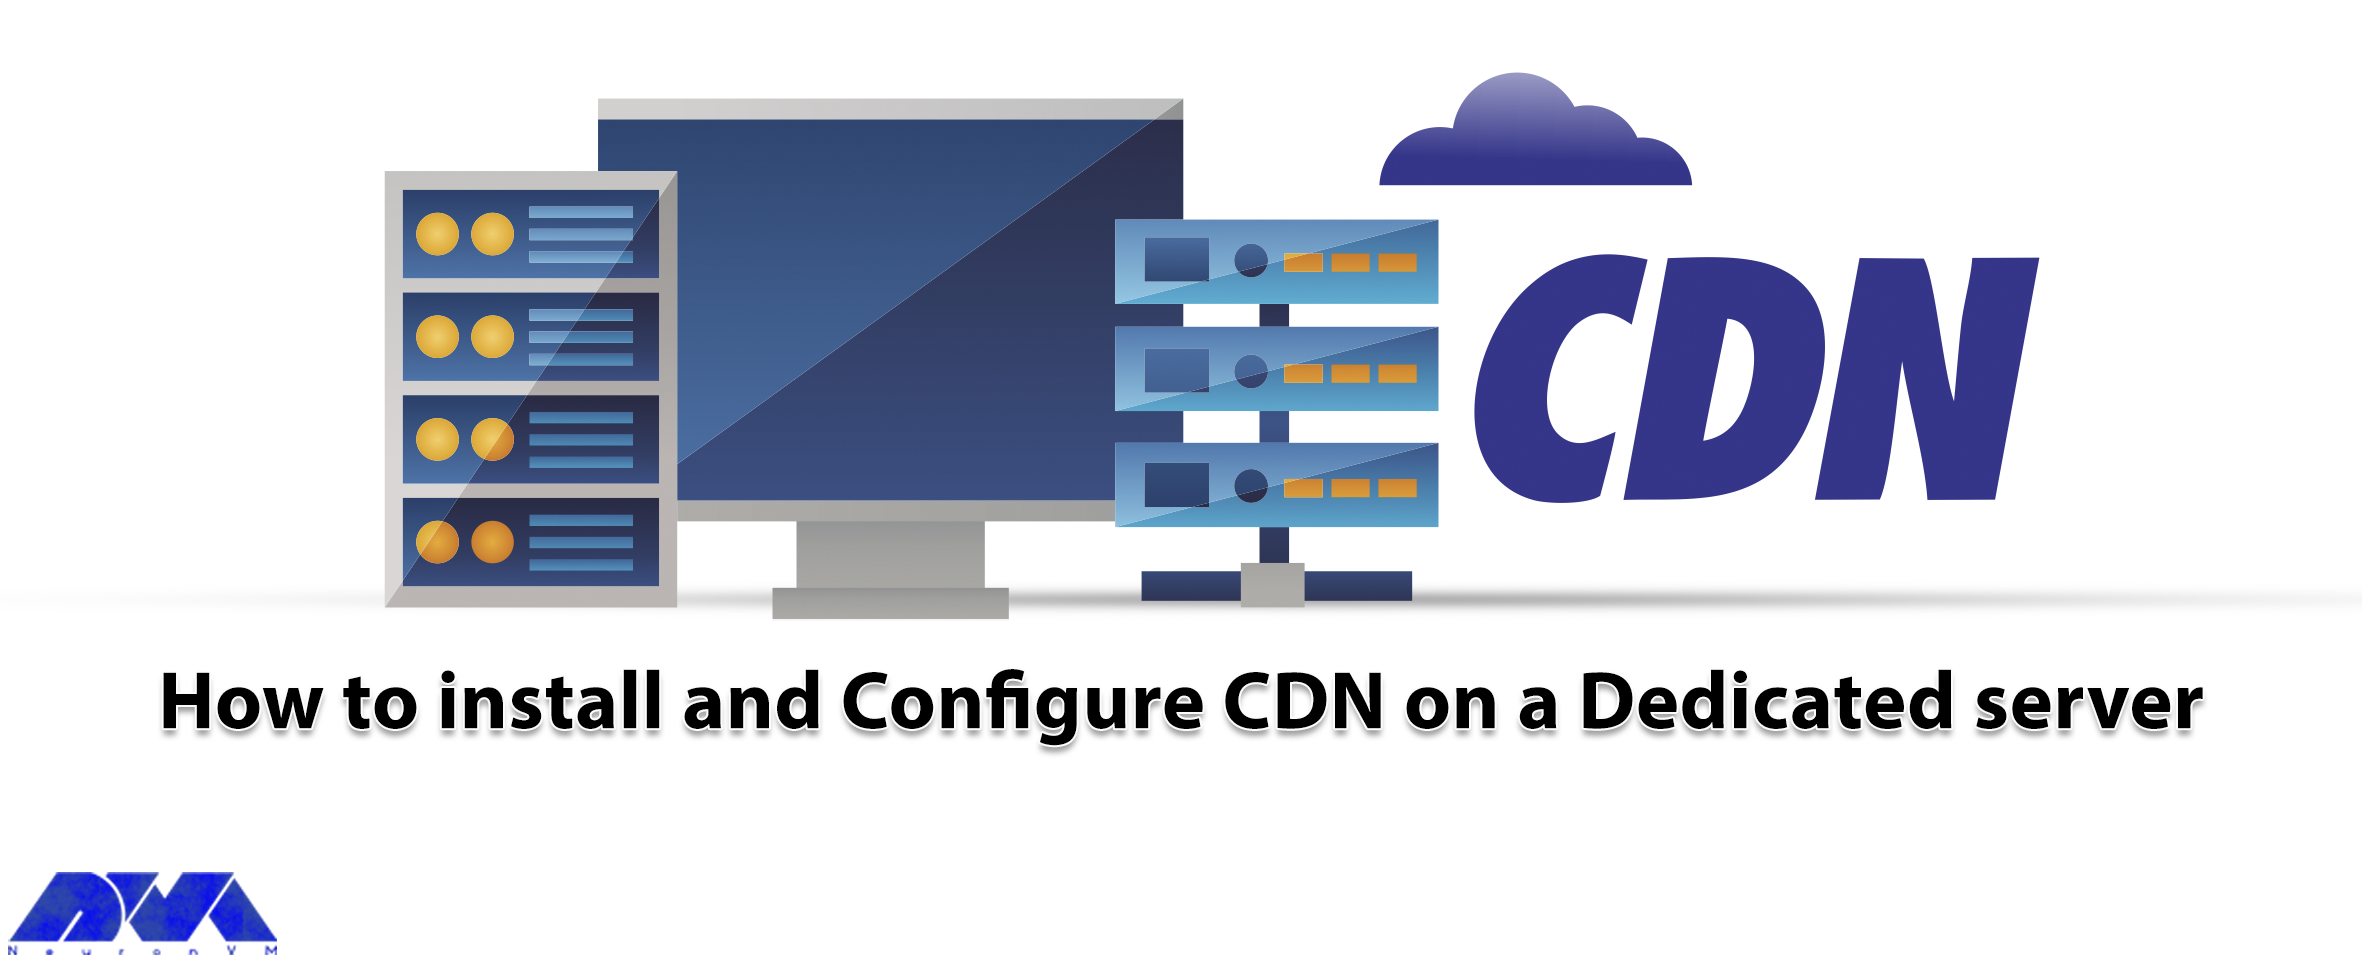 How to Install and Configure CDN on a Dedicated Server - NeuronVM